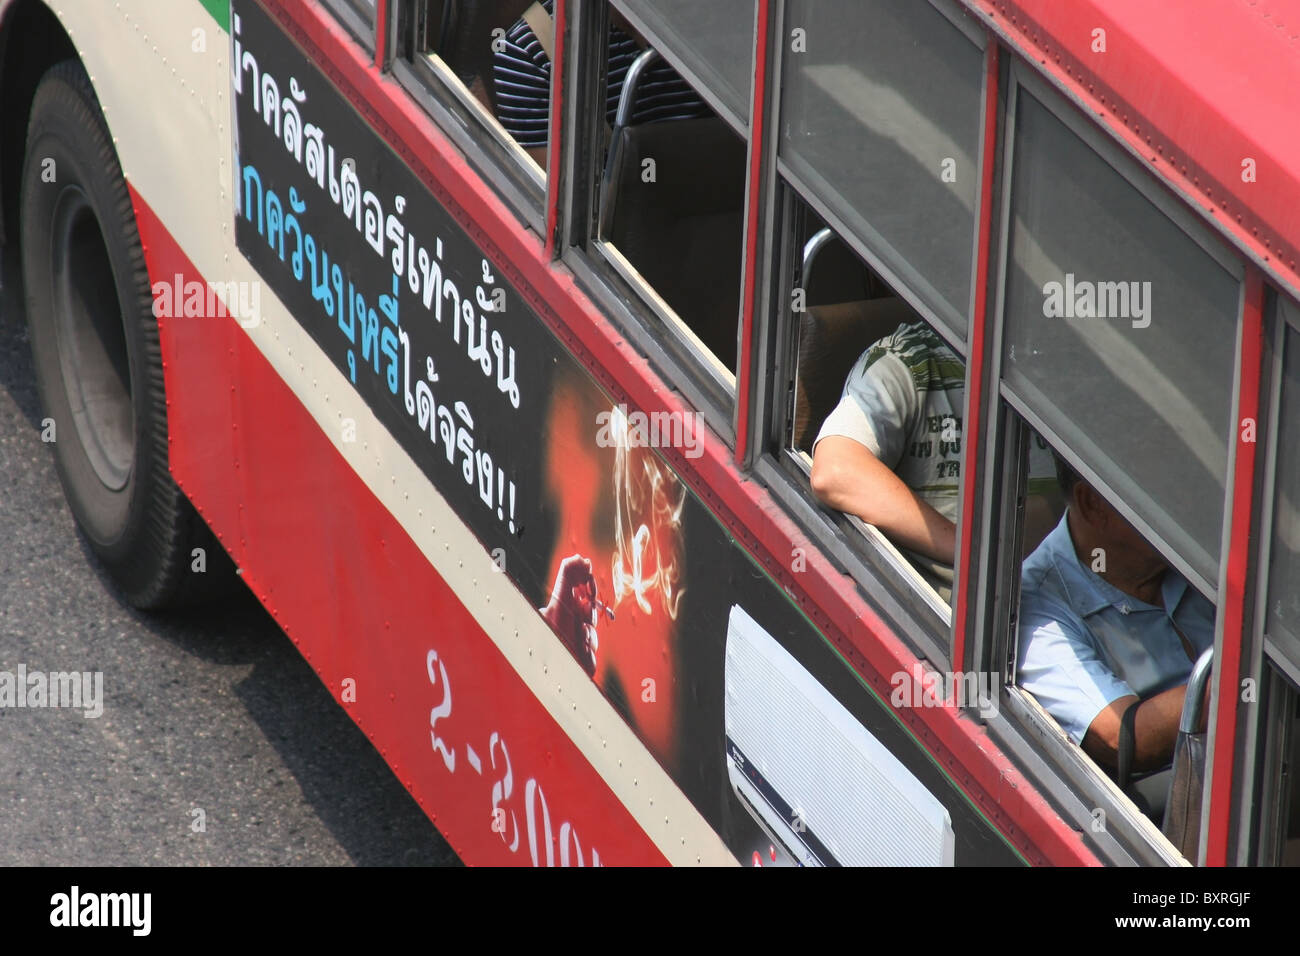 A bus with cigarette advertising is traveling with passengers sitting near open windows on a street in Bangkok, Thailand. Stock Photo